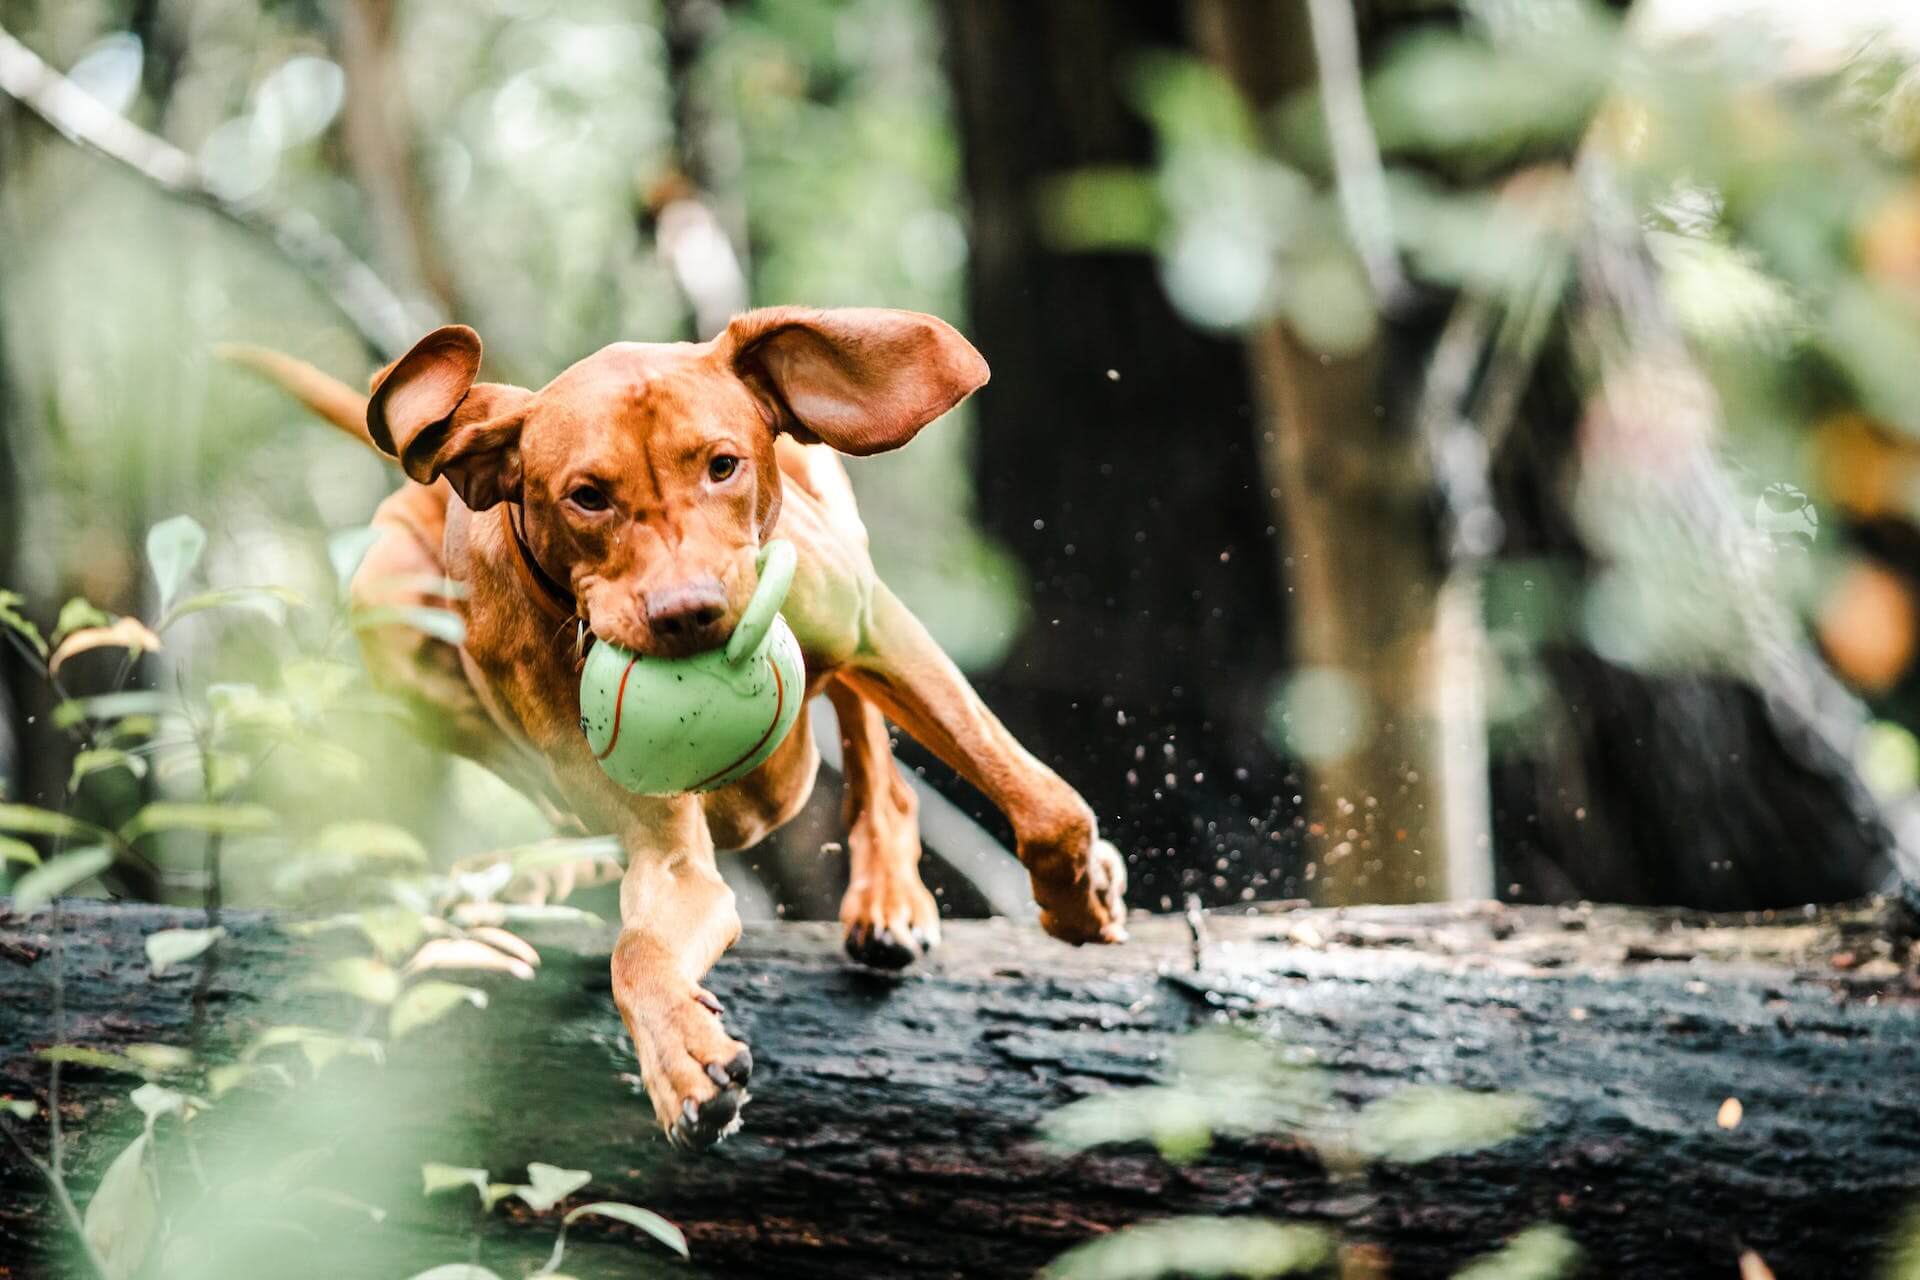 A Vizsla dog running through a forest with a ball in their mouth